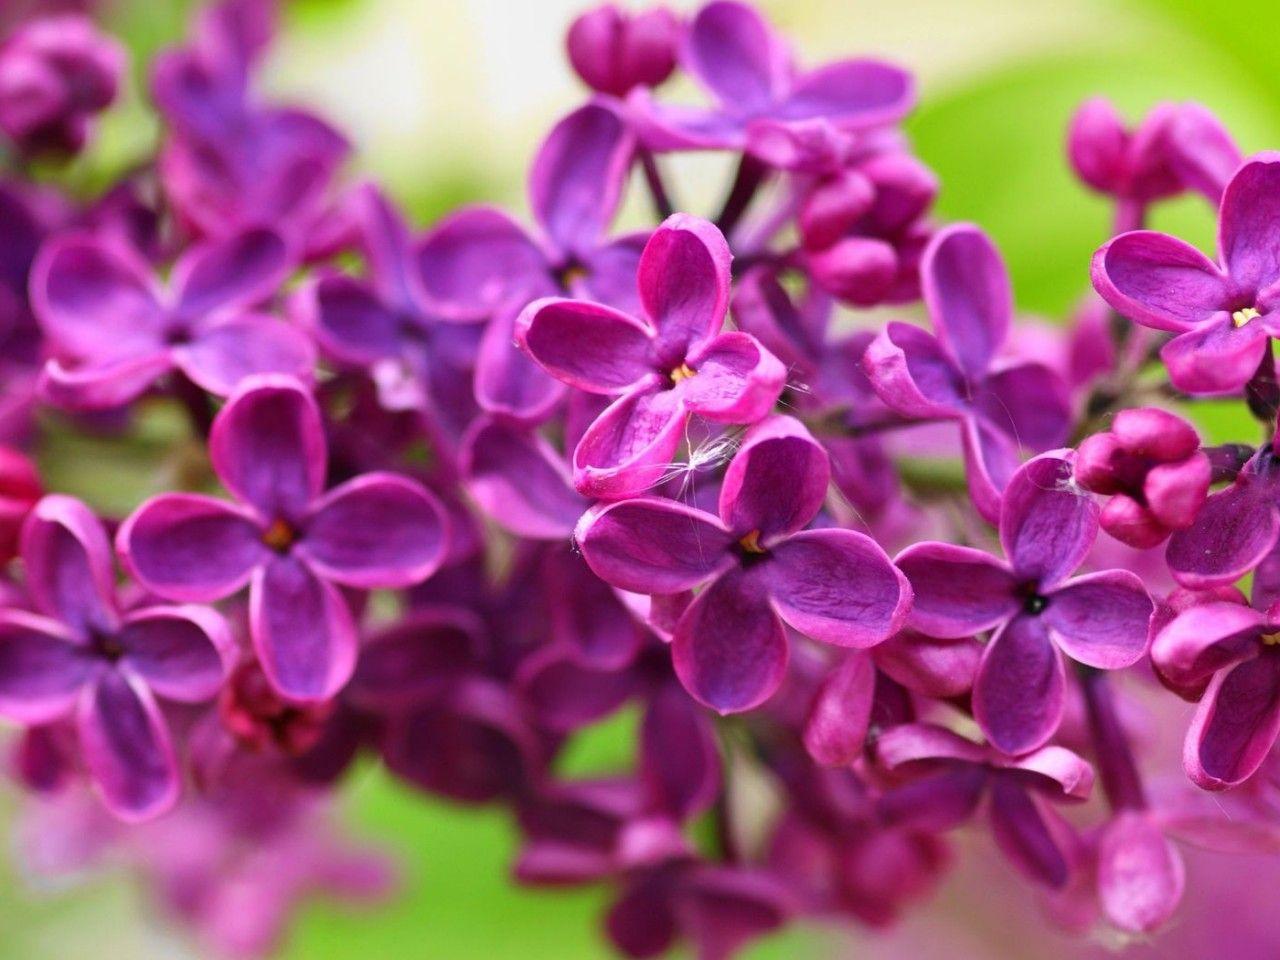 Lilac Flowers Wallpaper, HD Image Lilac Flowers Collection